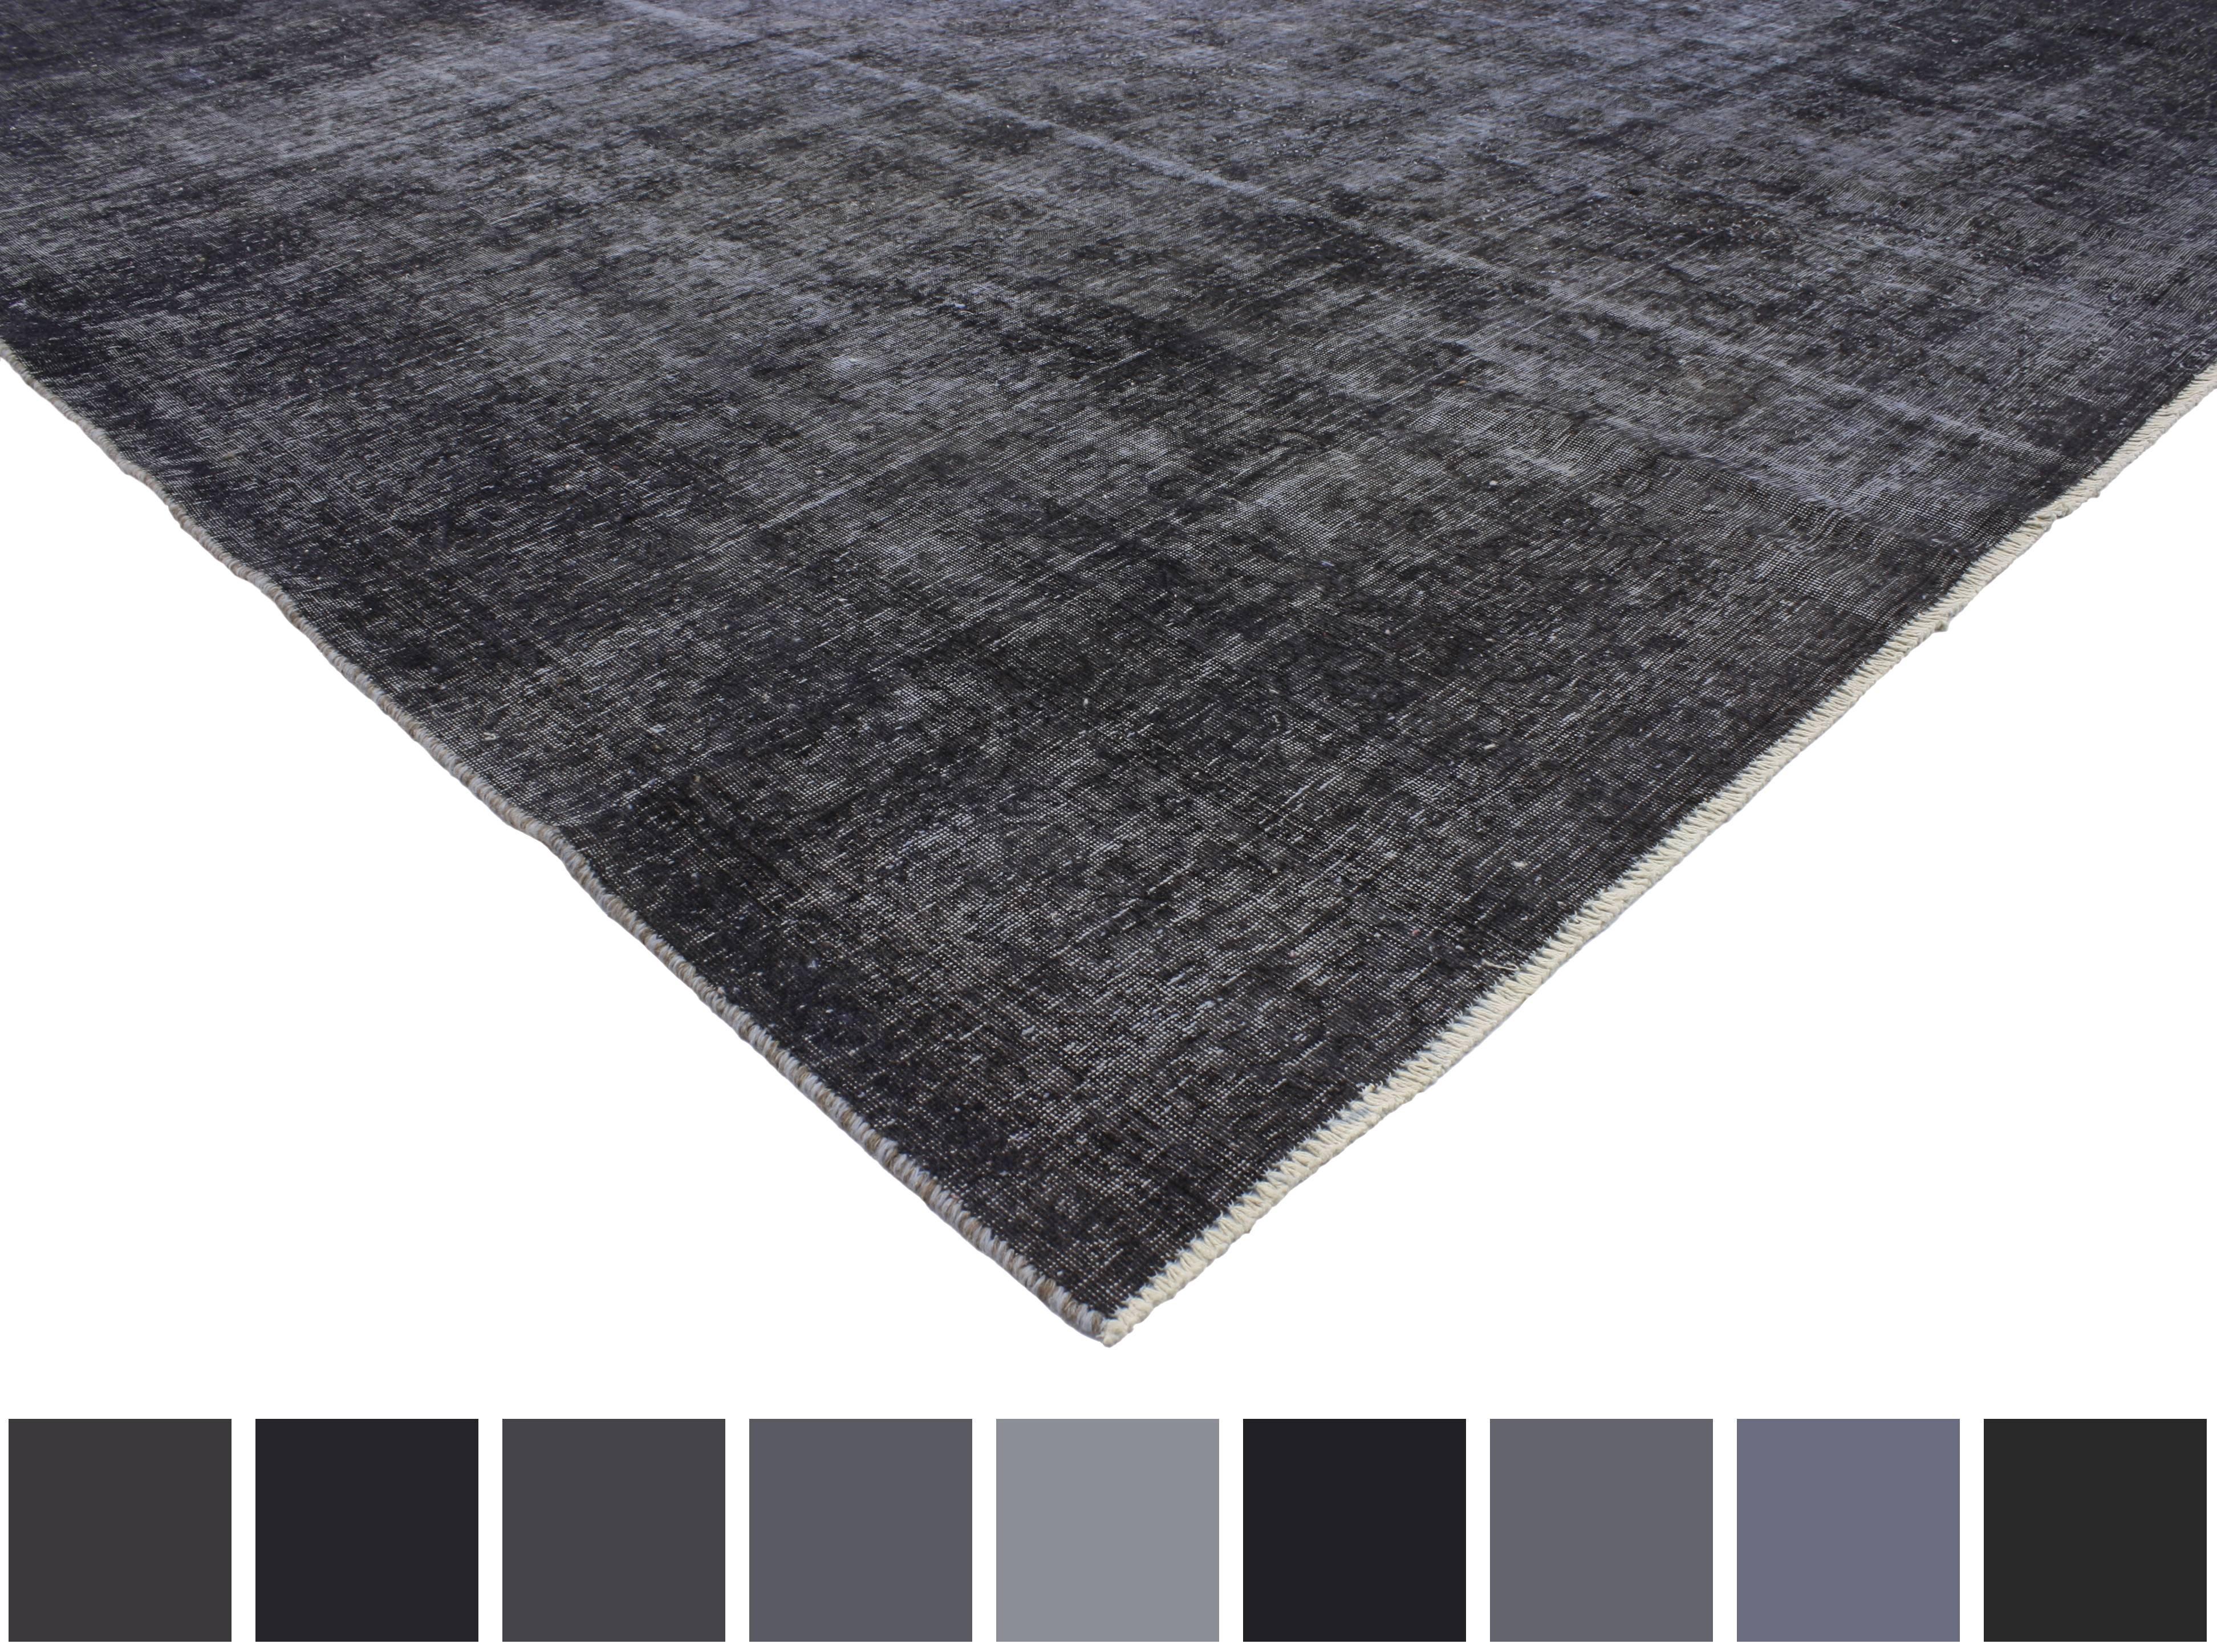 76821 Distressed Antique Persian Charcoal Overdyed Rug with Modern Industrial Style 09'06 X 12'00. Defined and raw combined with luxe utilitarian appeal, this distressed overdyed antique Persian rug goes beyond the boundaries of design with